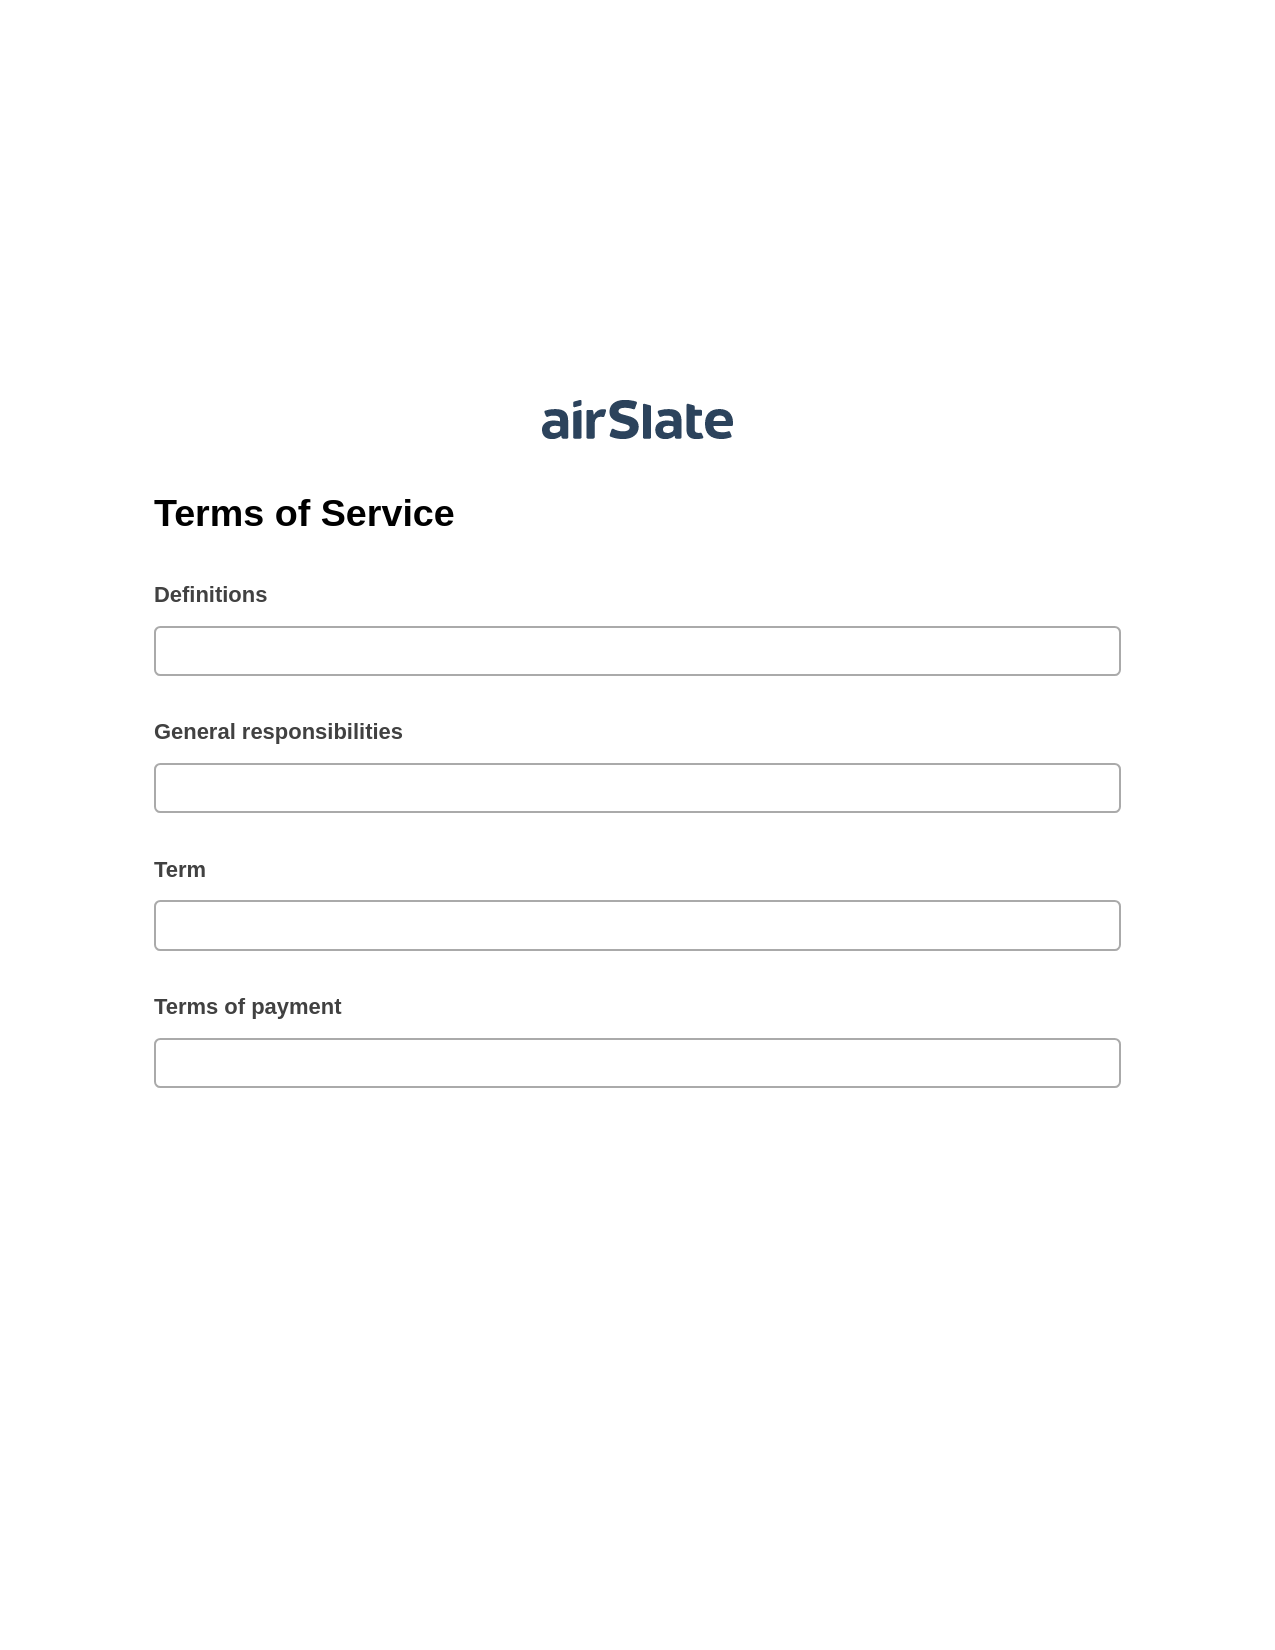 Multirole Terms of Service Pre-fill Slate from Microsoft Dynamics 365 Records Bot, 1Create Slate every Google Sheet Update Bot, Export to Smartsheet